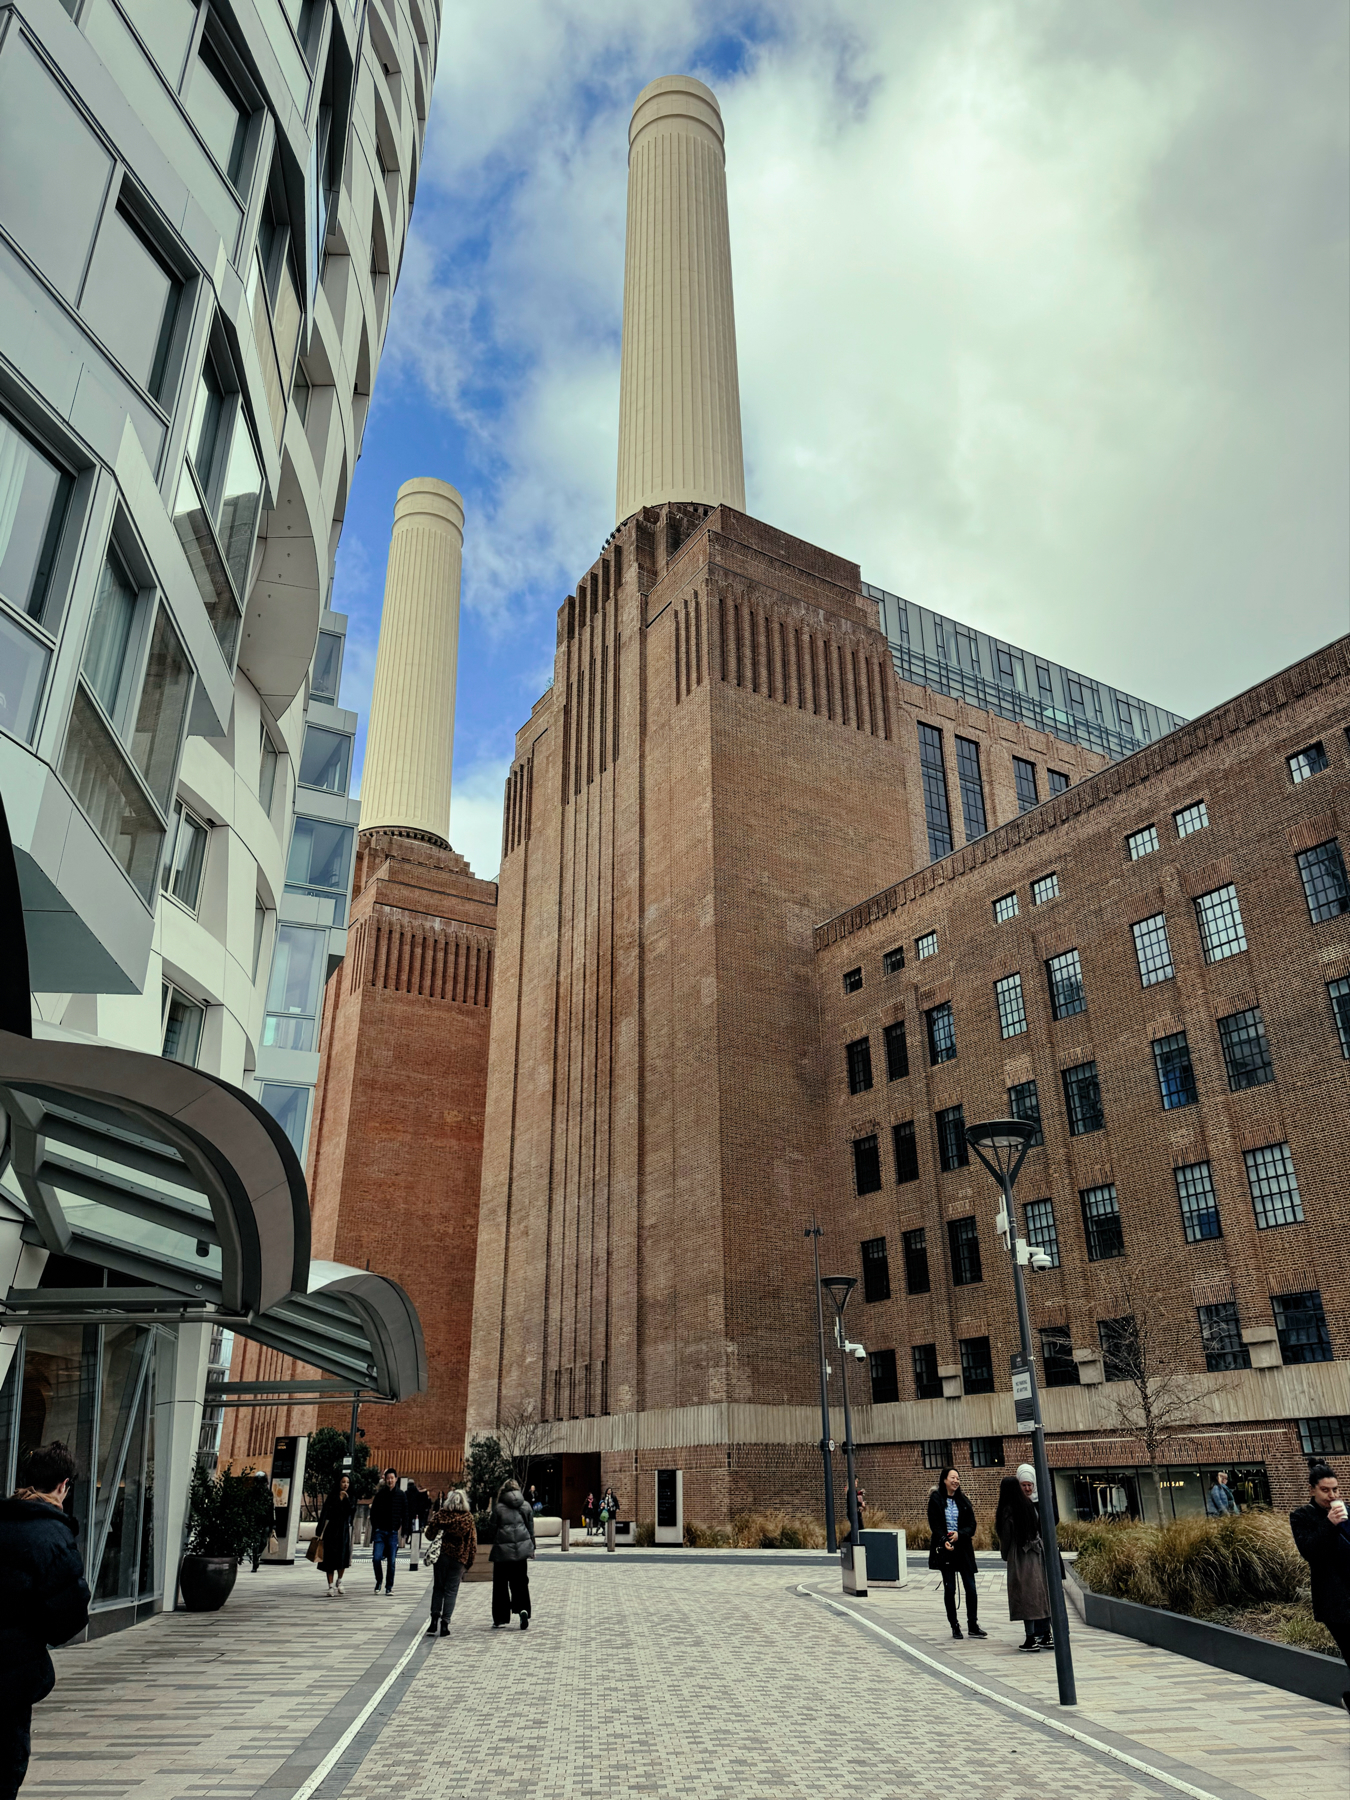 A cityscape featuring the iconic brick facade and tall chimneys of Battersea Power Station with people walking on the paved area in front and contemporary buildings to the side. Clouds adorn the sky above.